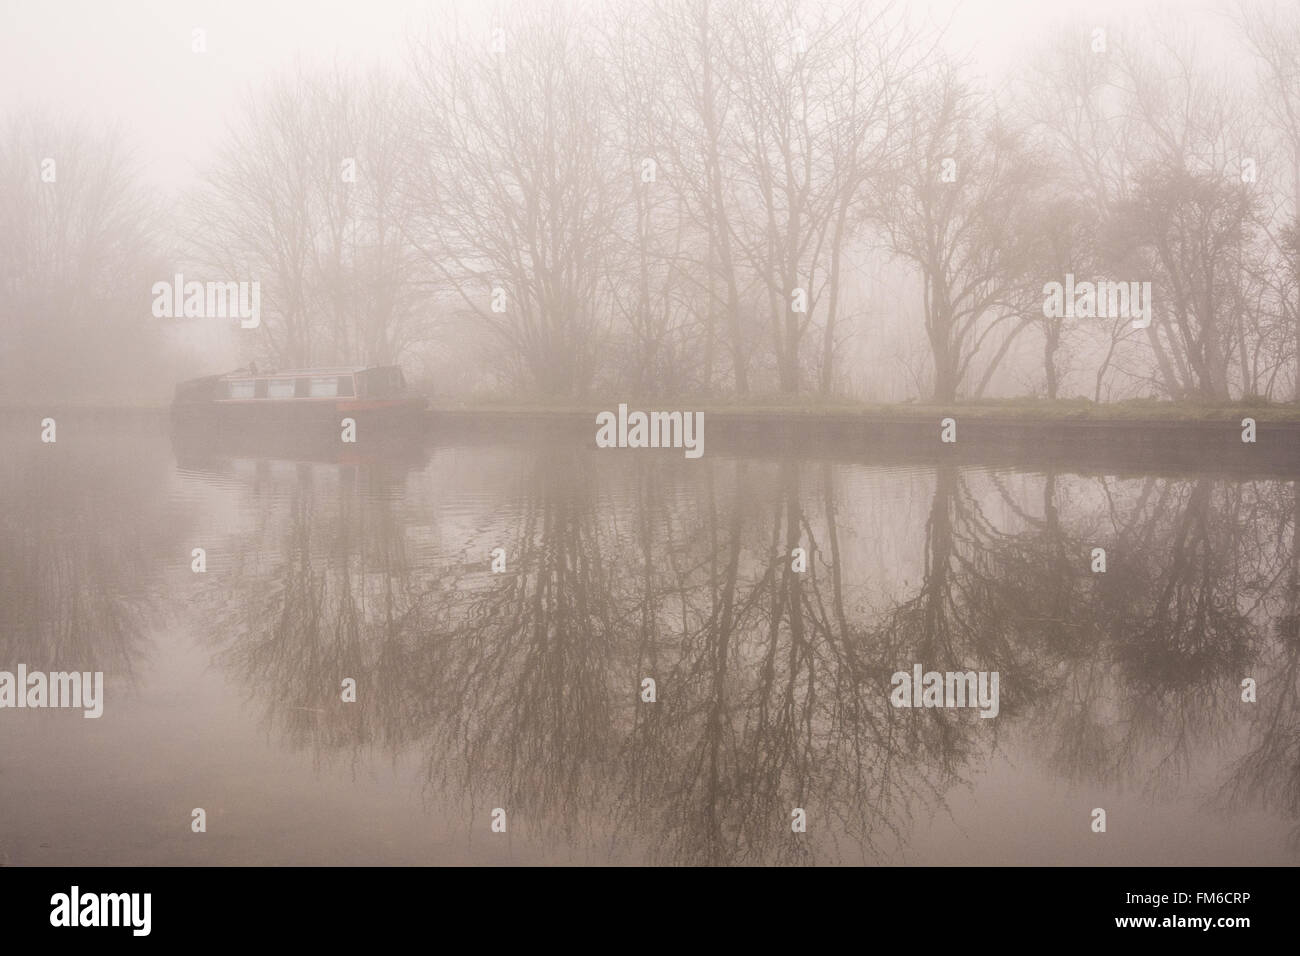 A houseboat and winter trees are mirrored in the still surface of the River Lee navigation in Tottenham, London on a foggy day.  Credit: Patricia Phillips/Alamy Live News Stock Photo